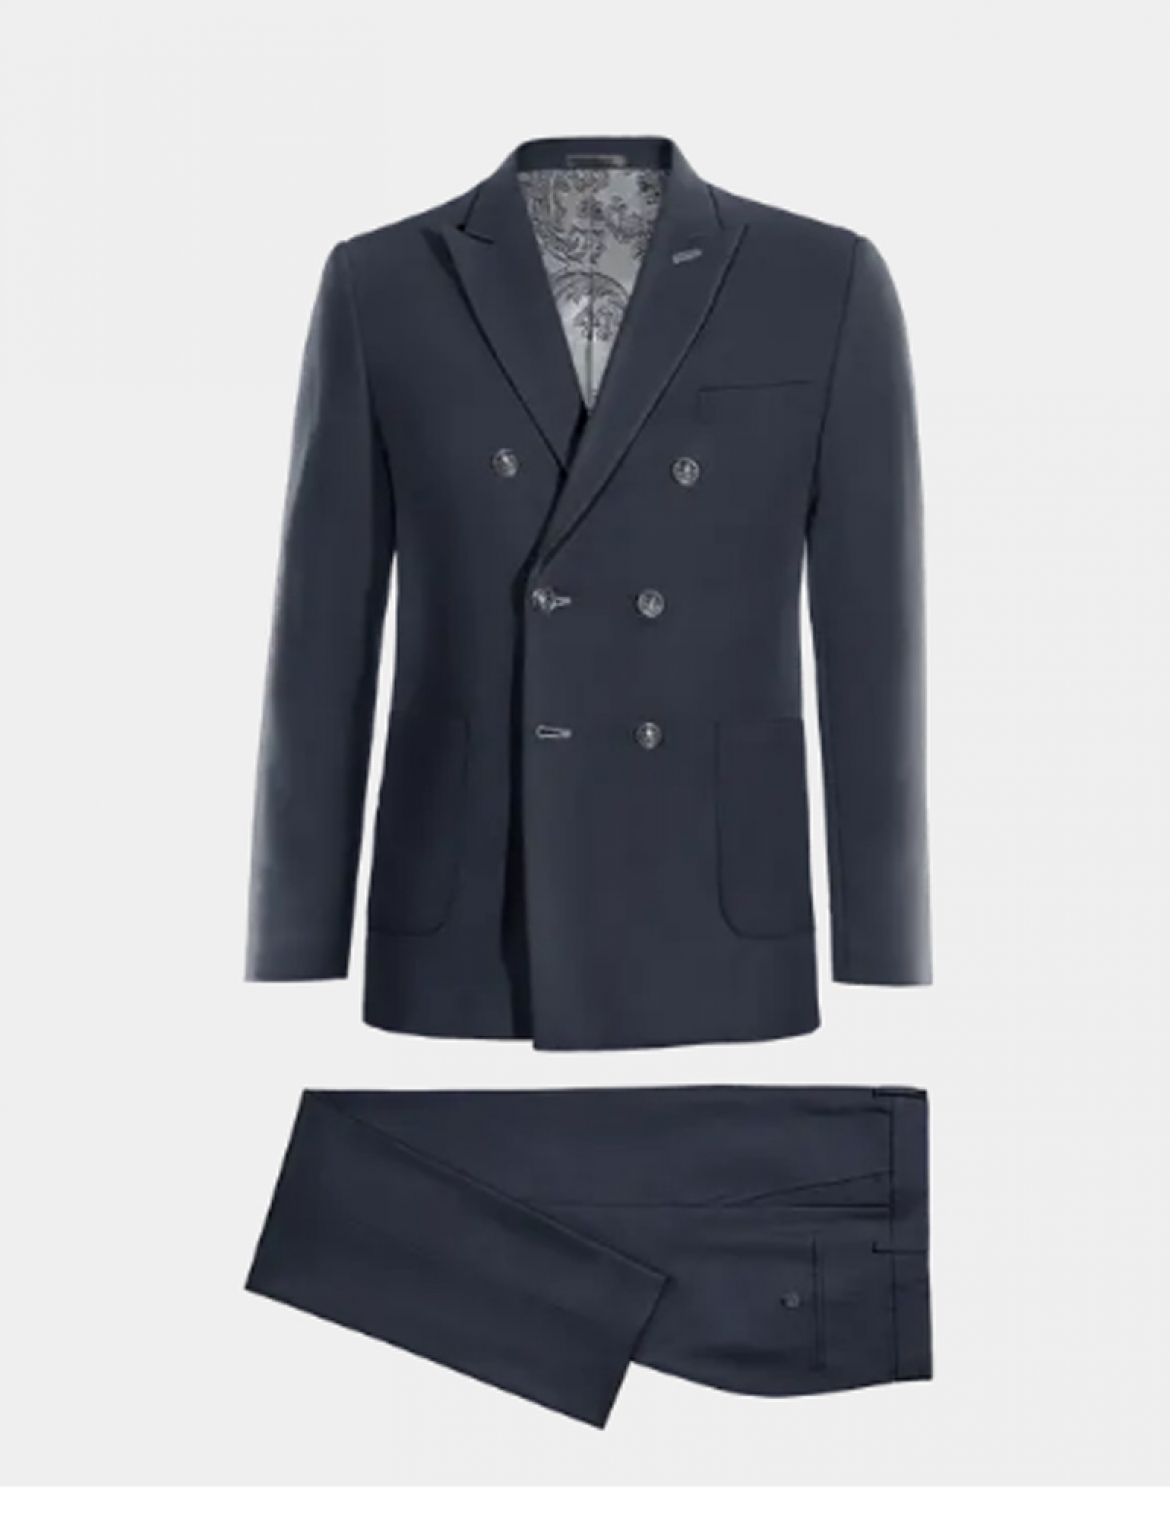 Double Breasted Suit - Blue Wool Blend